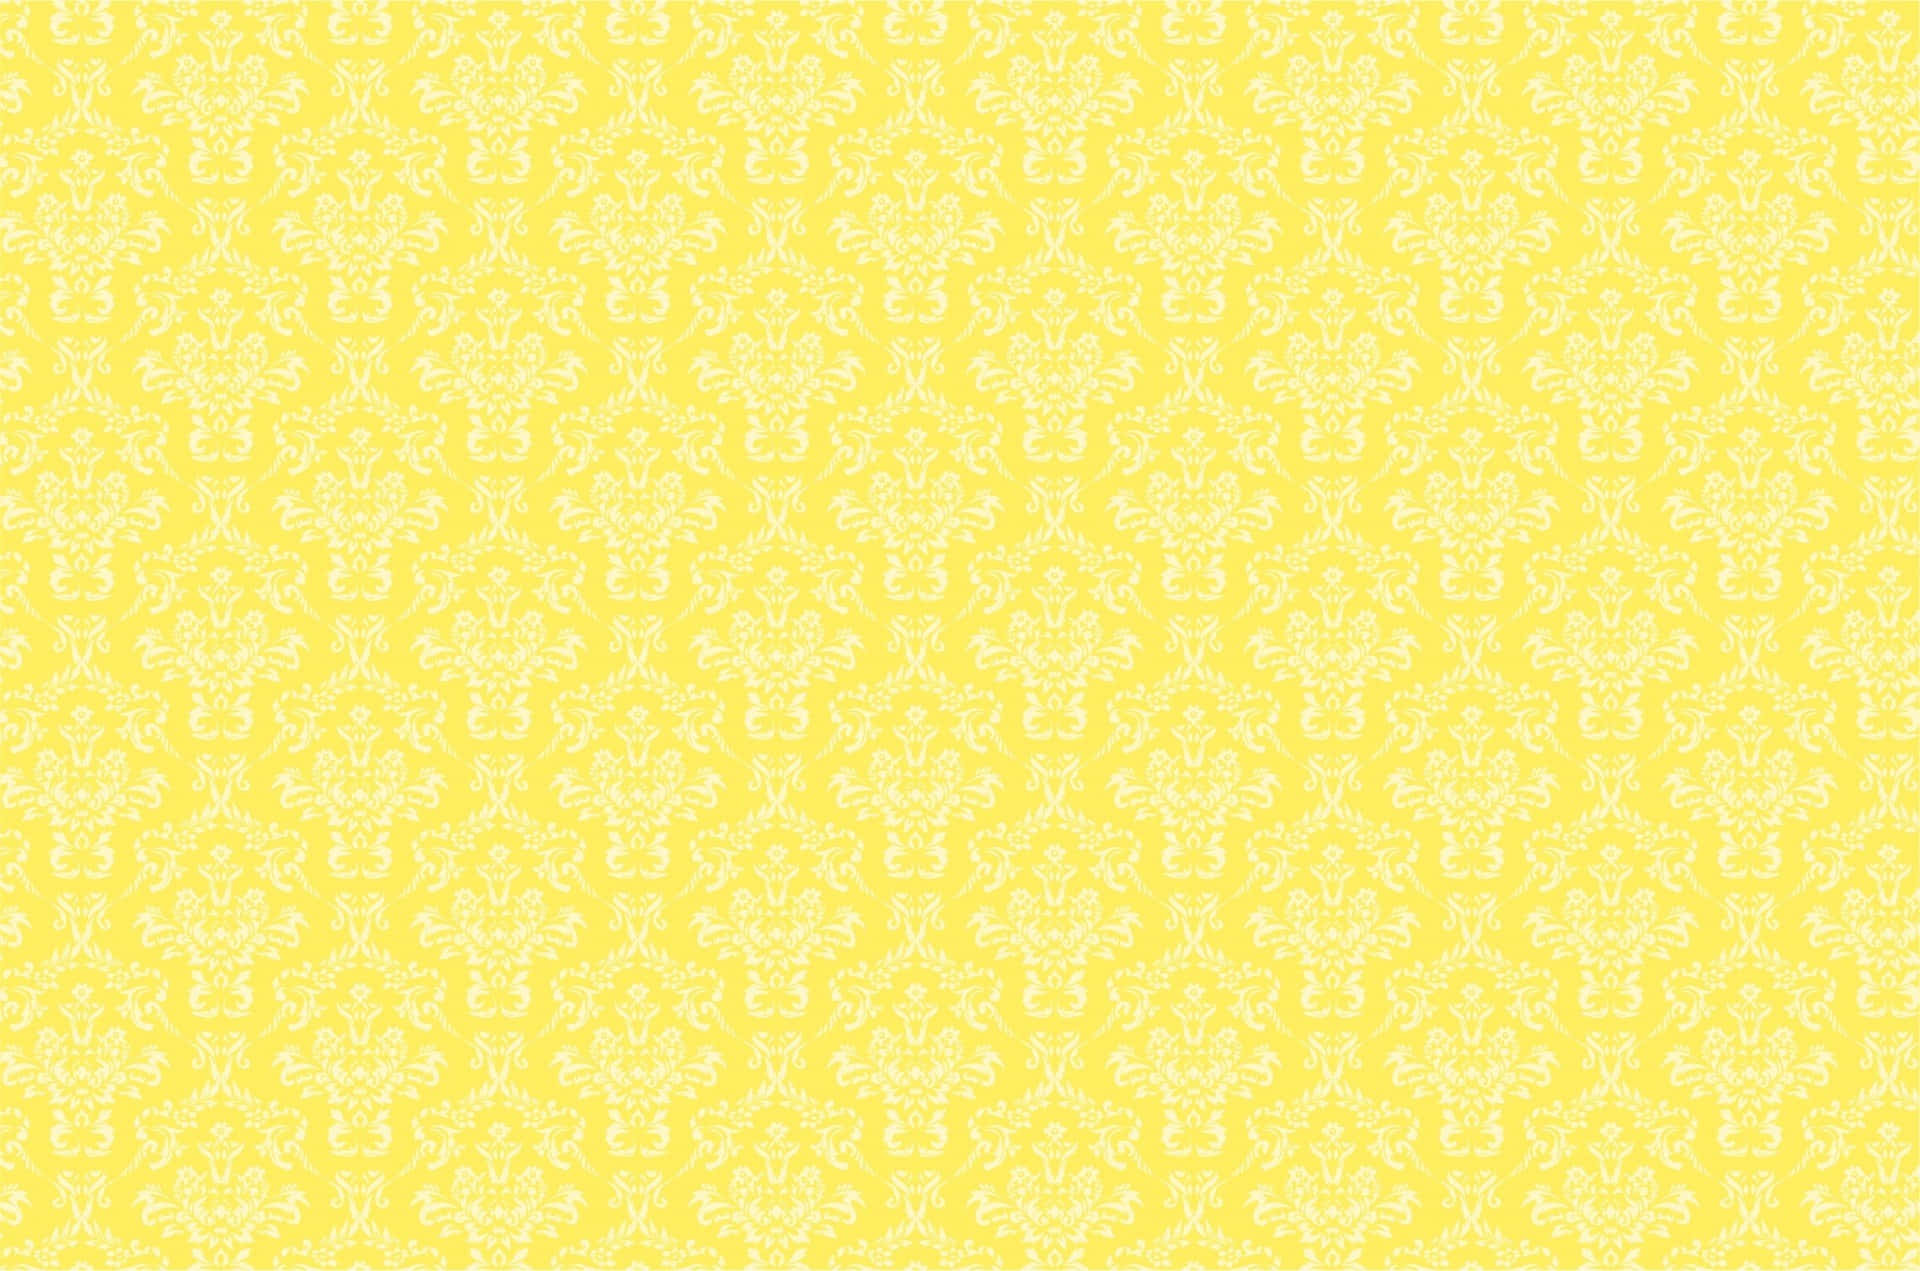 Bright and Cheerful Light Yellow Background